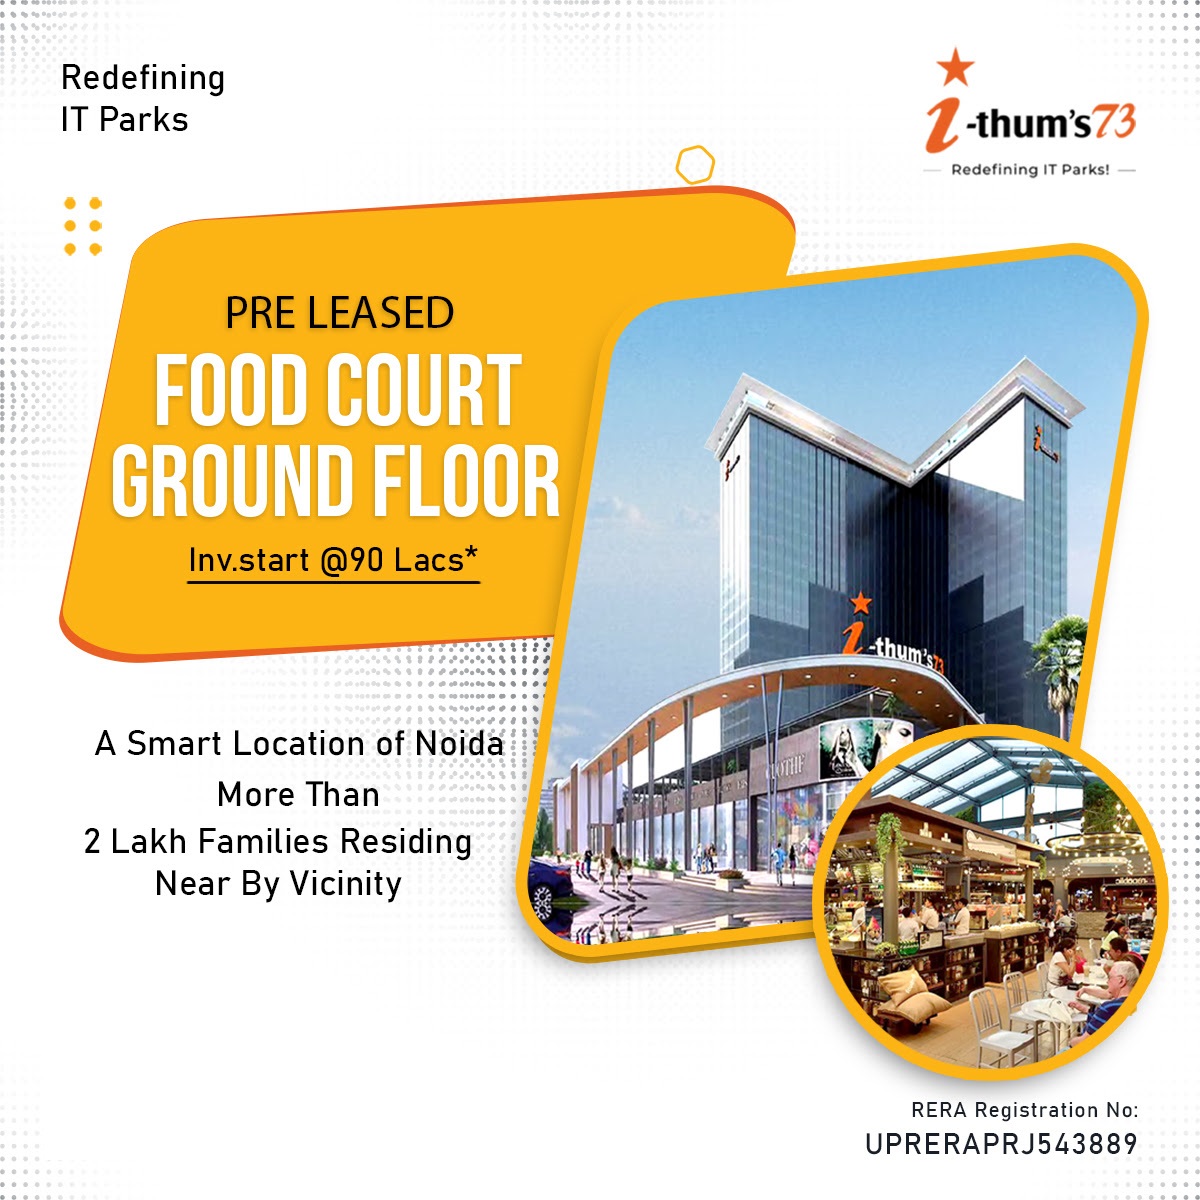 Pre leased food court ground floor Inv.start Rs 90 Lacs at Grandslam The I Thum, Noida Update